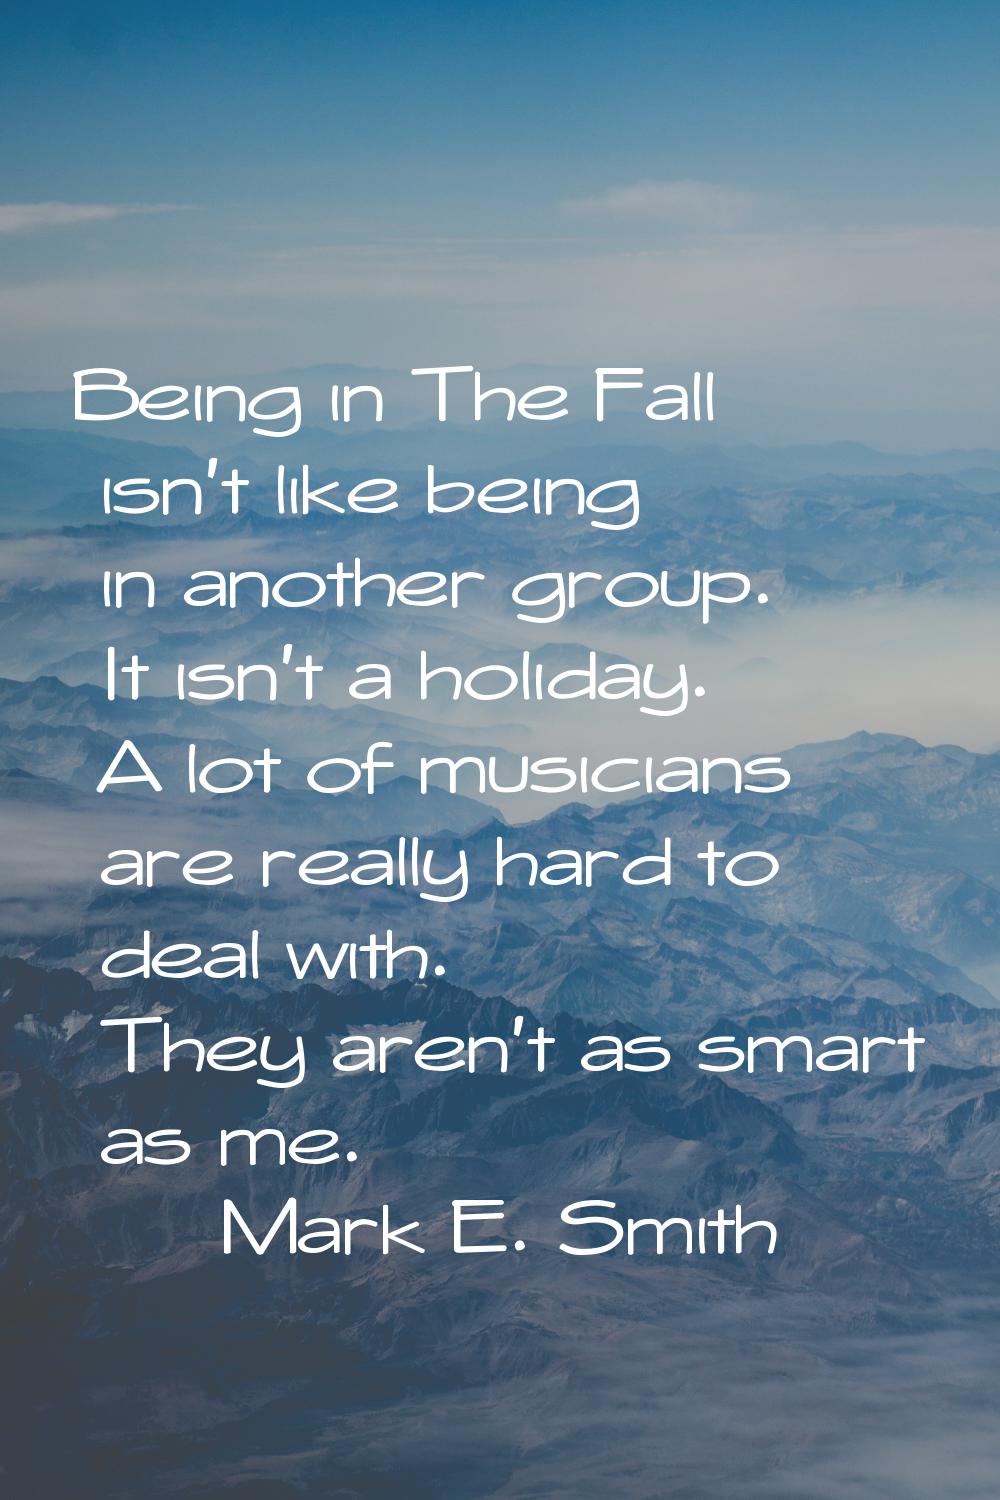 Being in The Fall isn't like being in another group. It isn't a holiday. A lot of musicians are rea